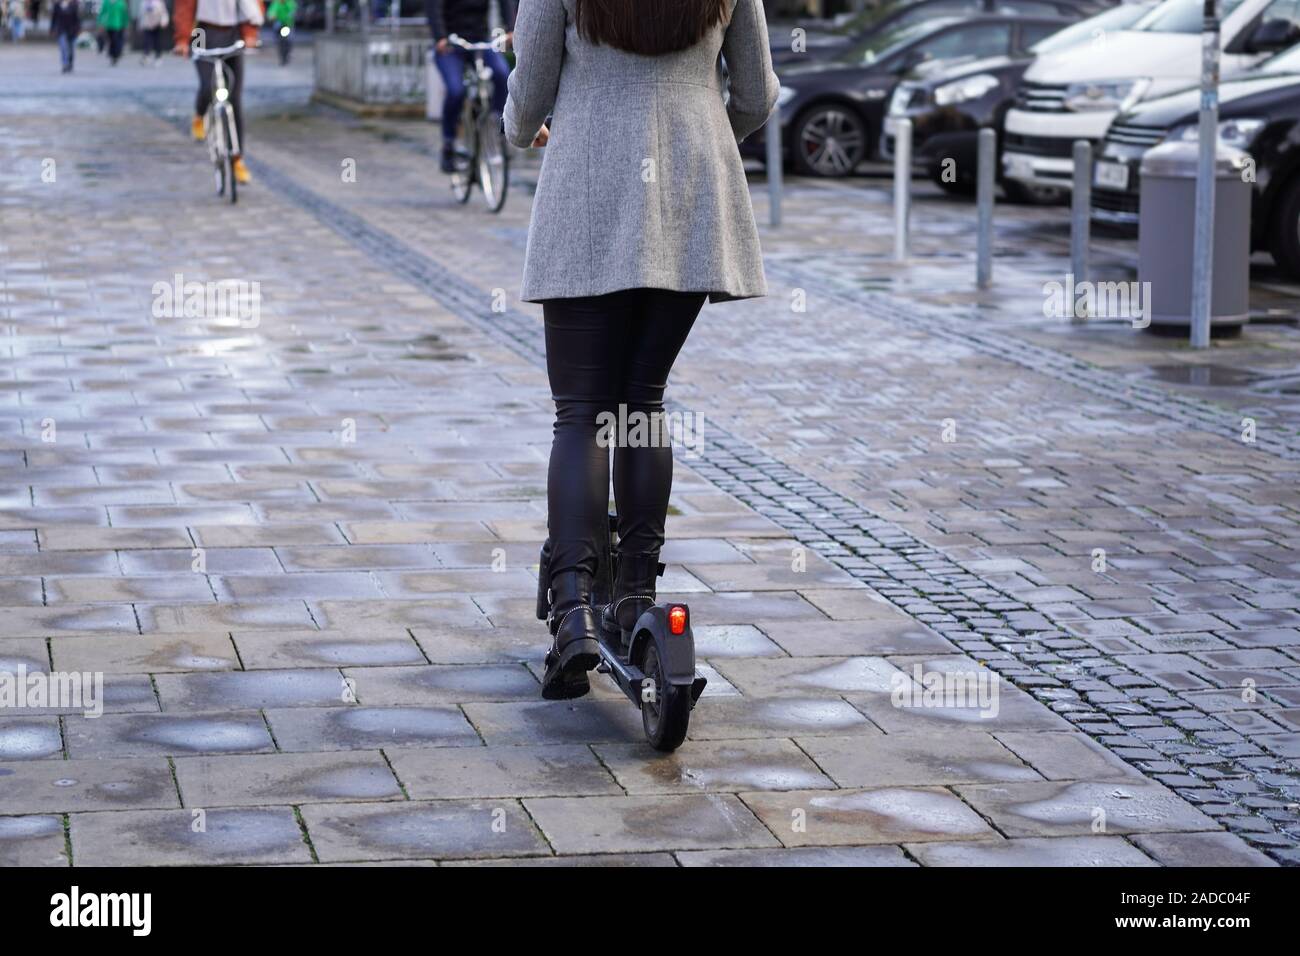 electric scooter or e-scooter on busy city sidewalk shared with bicycles and pedestrians Stock Photo